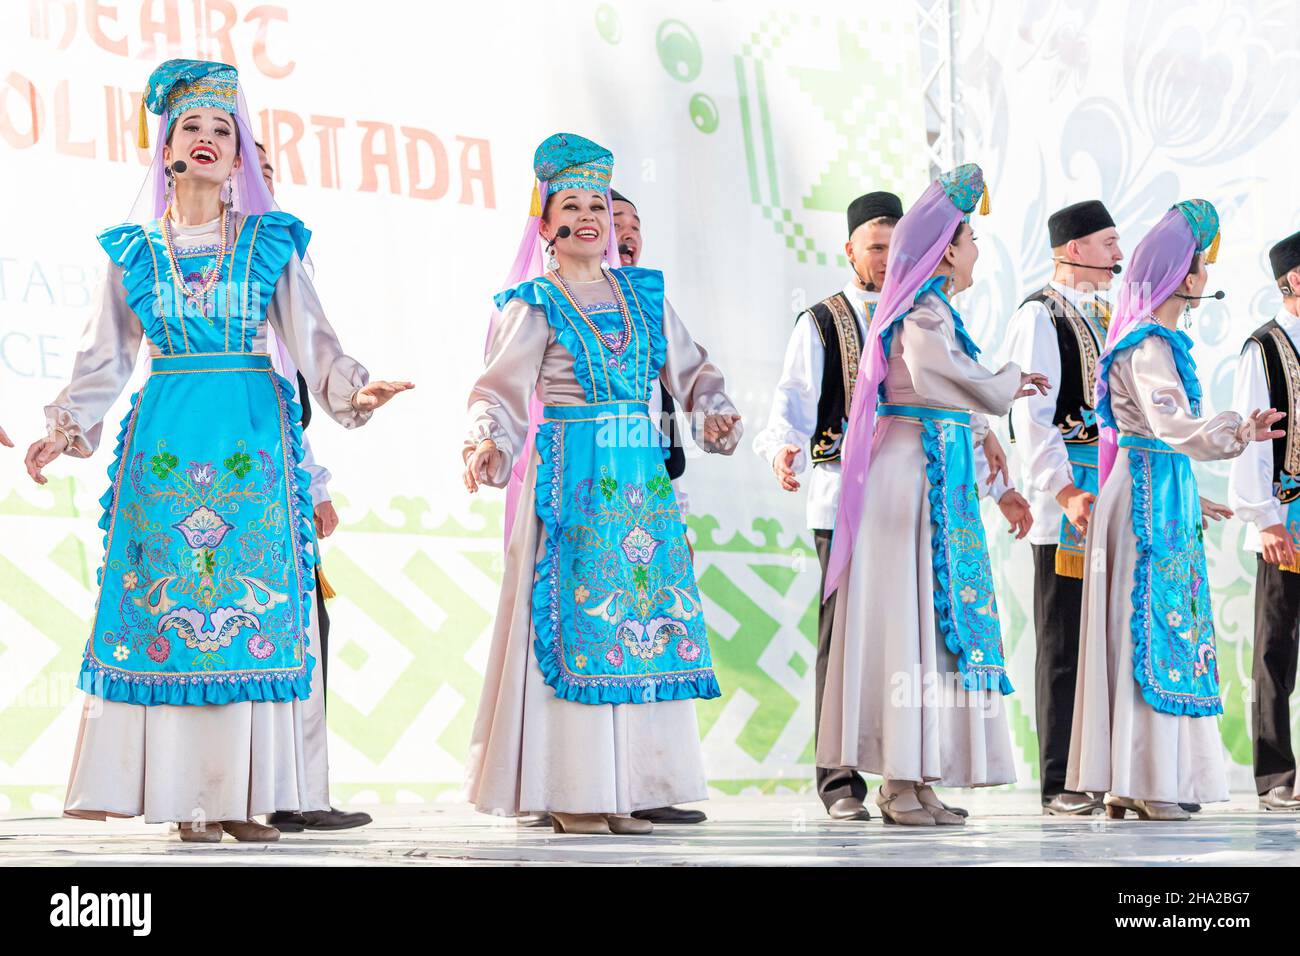 06 July 2021, Ufa, Russia: Tatar National Ensemble in traditional clothes dances and sings at the Folkloriada Festival Stock Photo